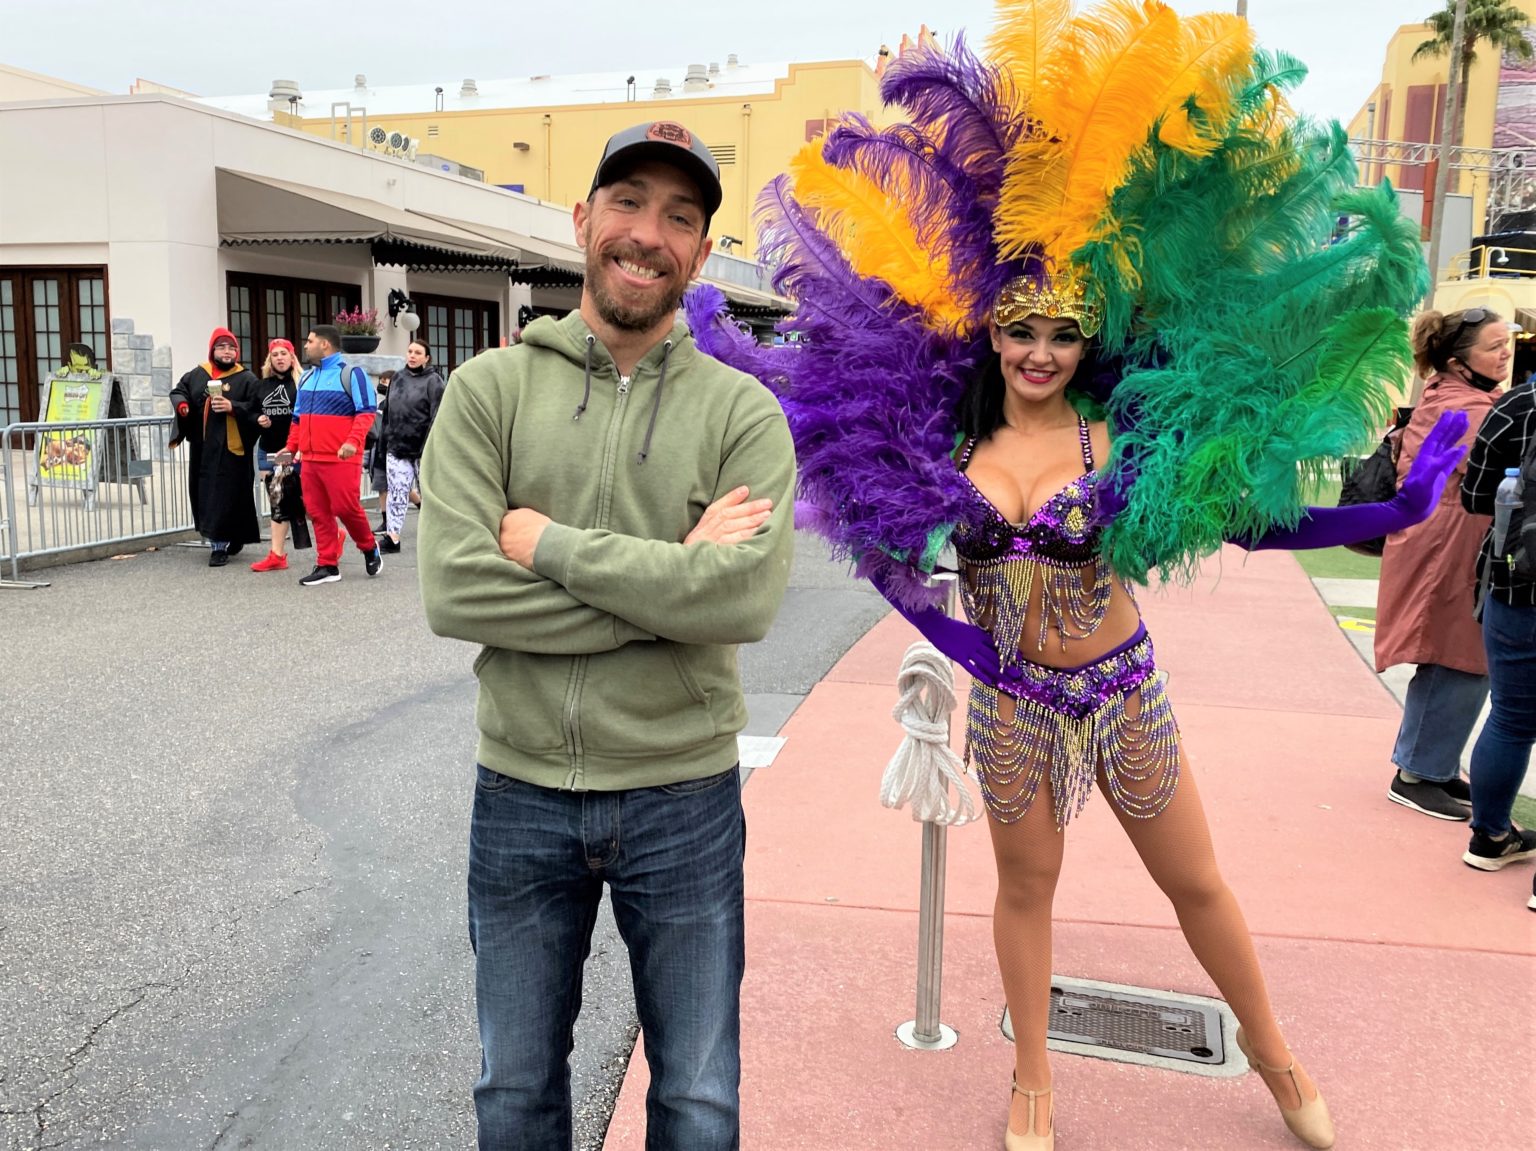 How to Have an Epic Date at Universal Orlando Mardi Gras 2022